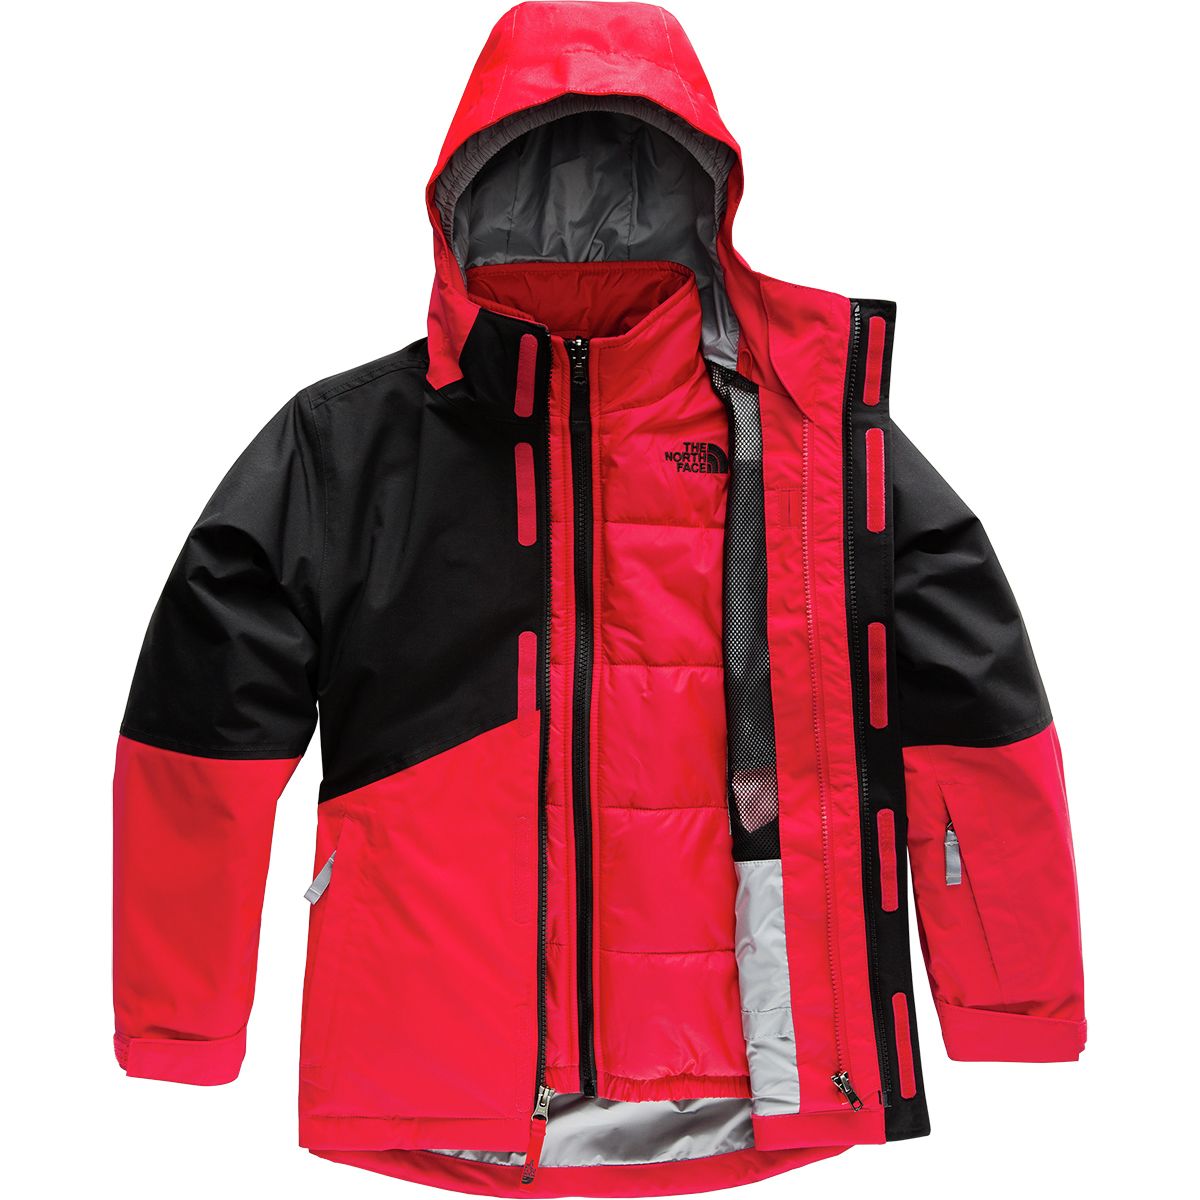 The North Face Boundary Hooded Triclimate Jacket - Boys' | Backcountry.com